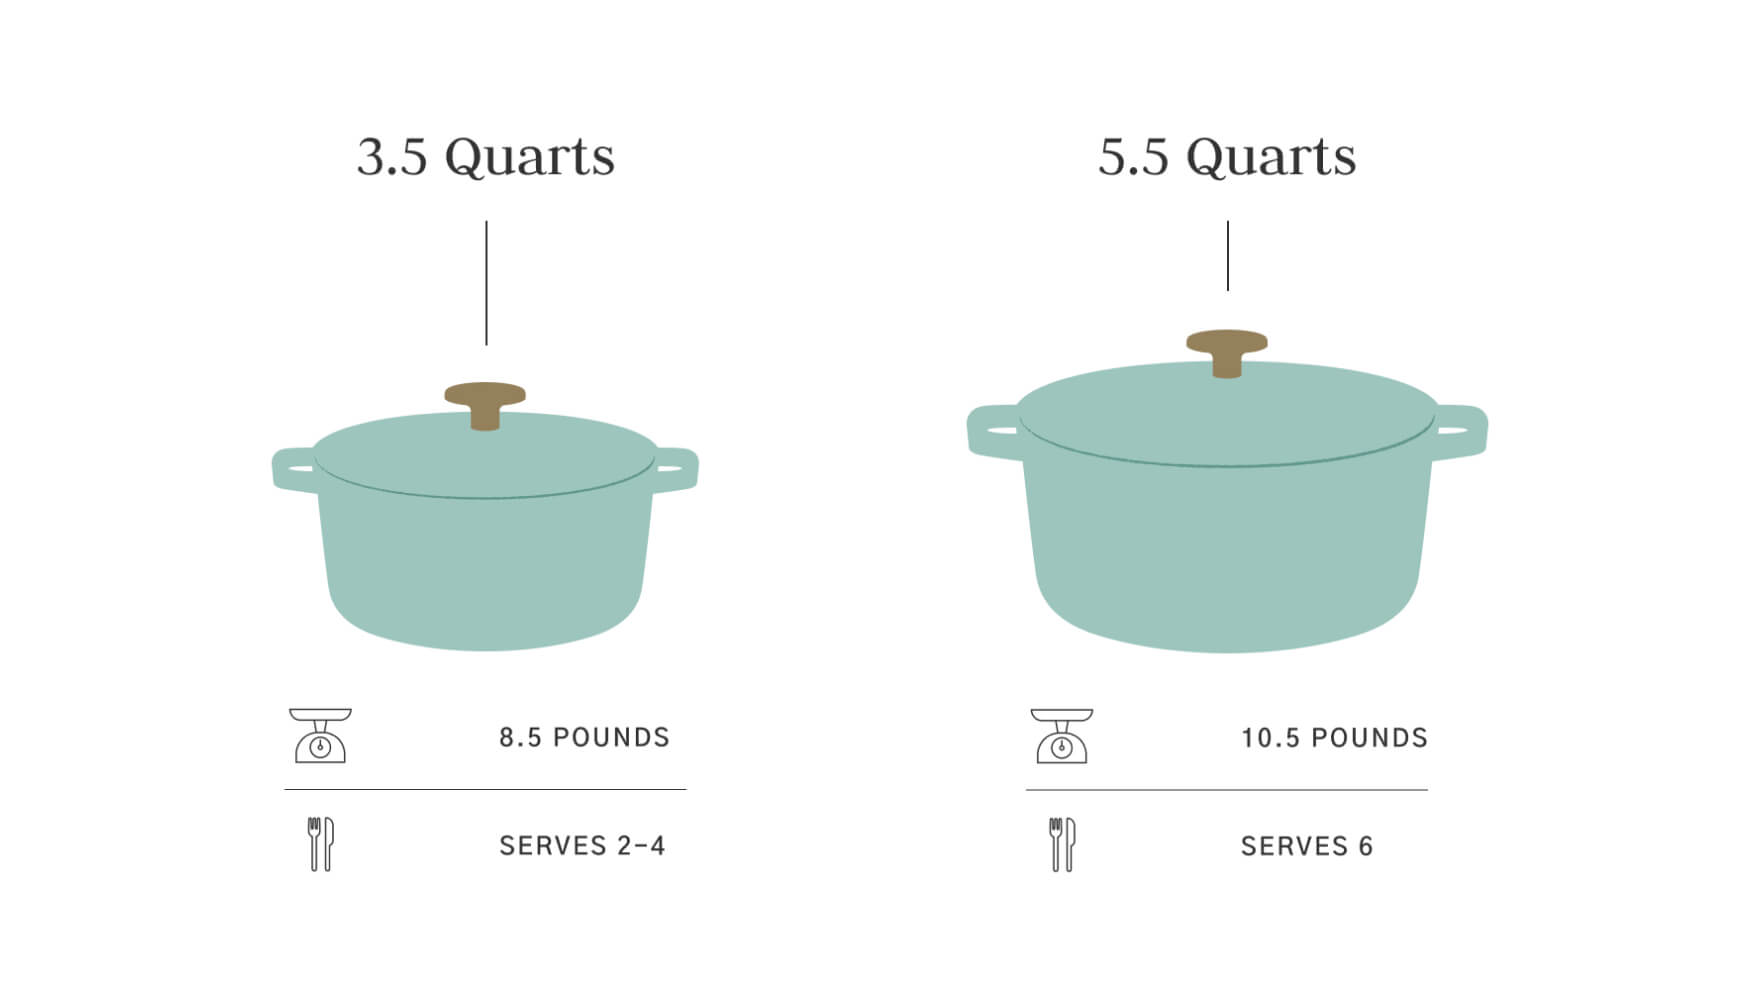 Dutch Oven Sizes - Made In